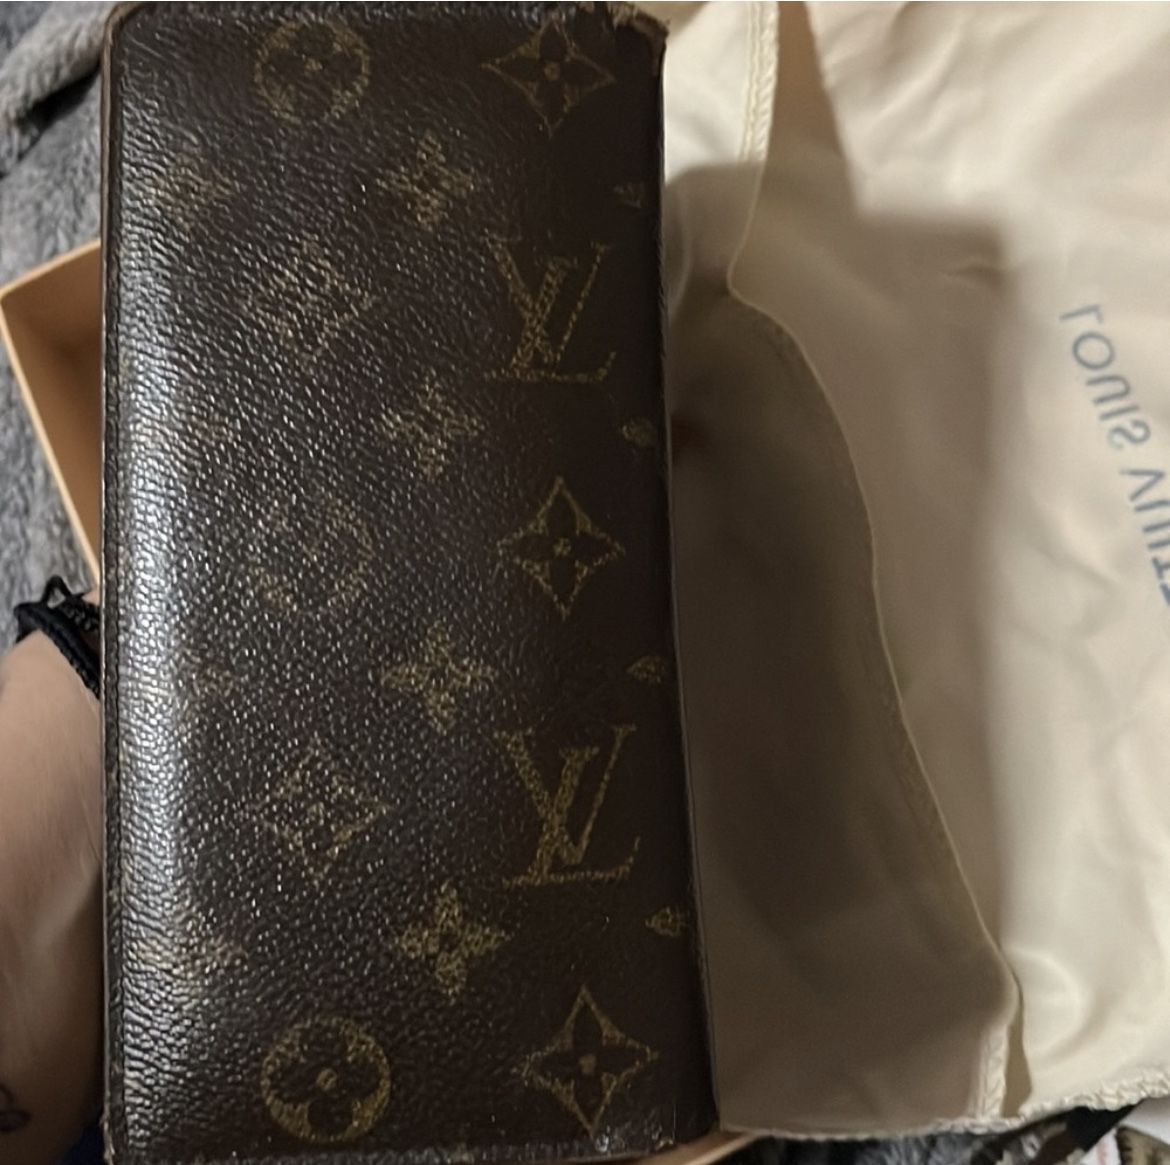 Louis Vuitton Wallets for sale in Fort Worth, Texas